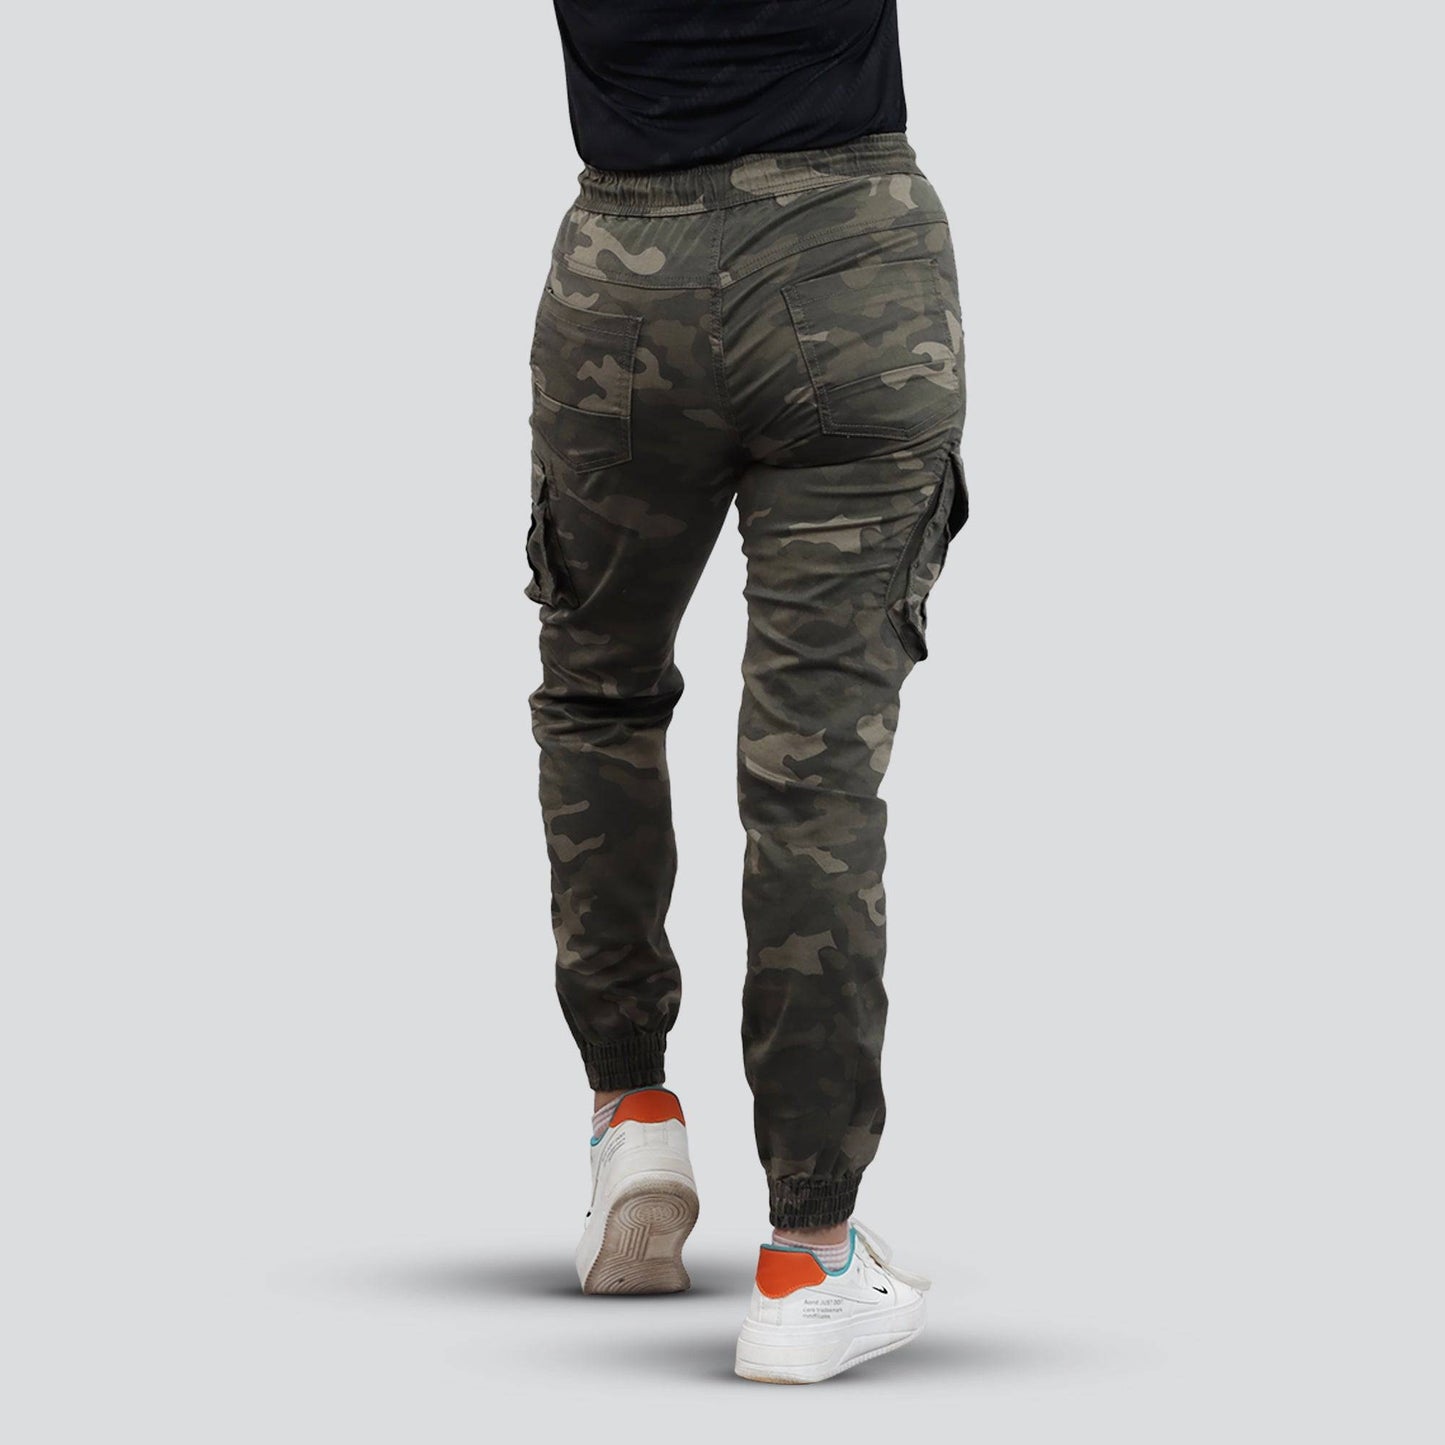 Women's Camo Cargo Pants With 6 Pockets - Valetica Sports